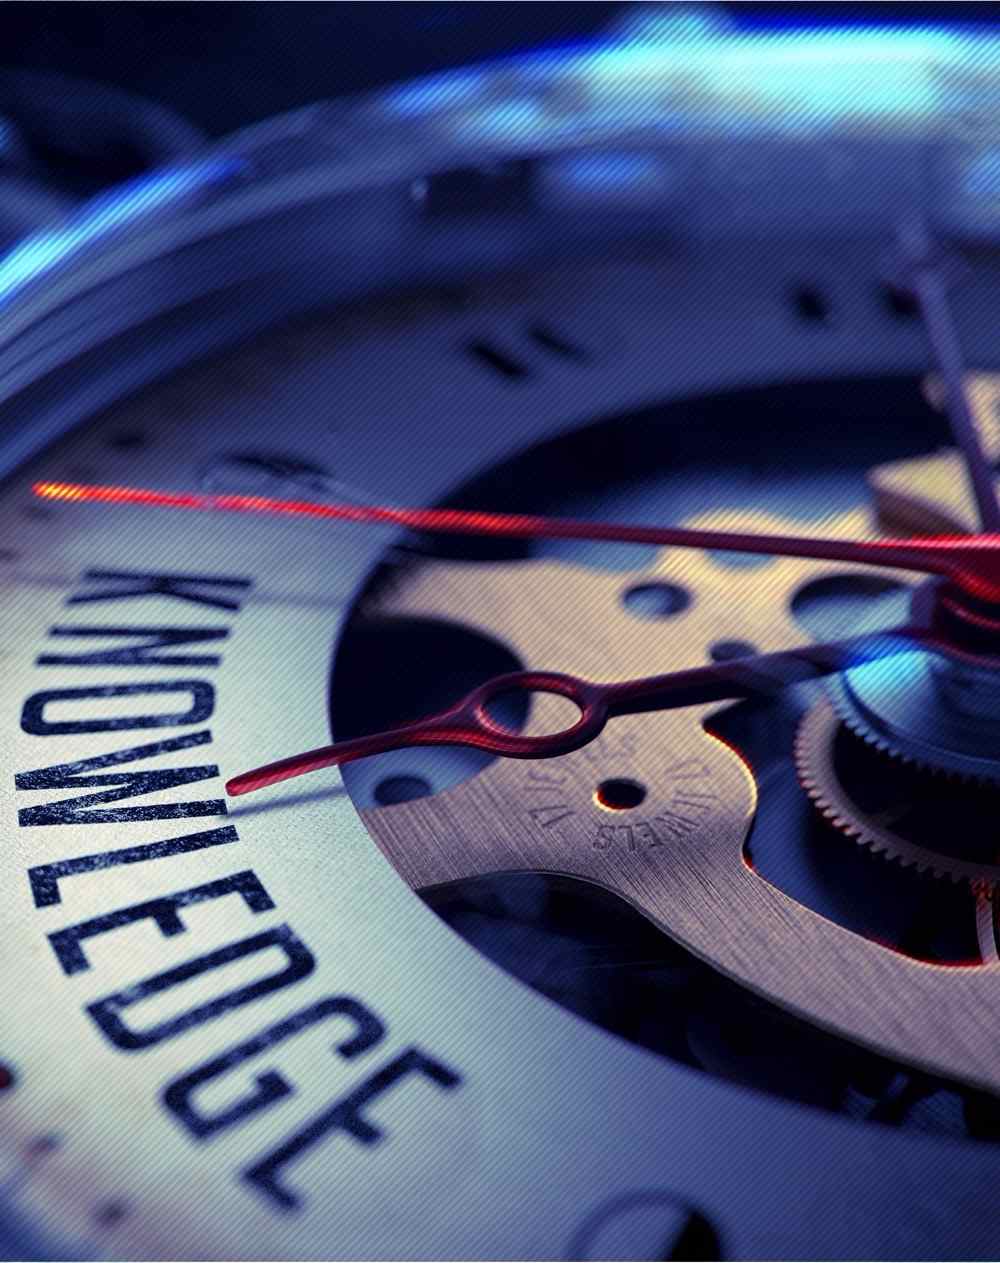 macro photo of a watch mechanism with one of the arrows pointing to the word knowledge